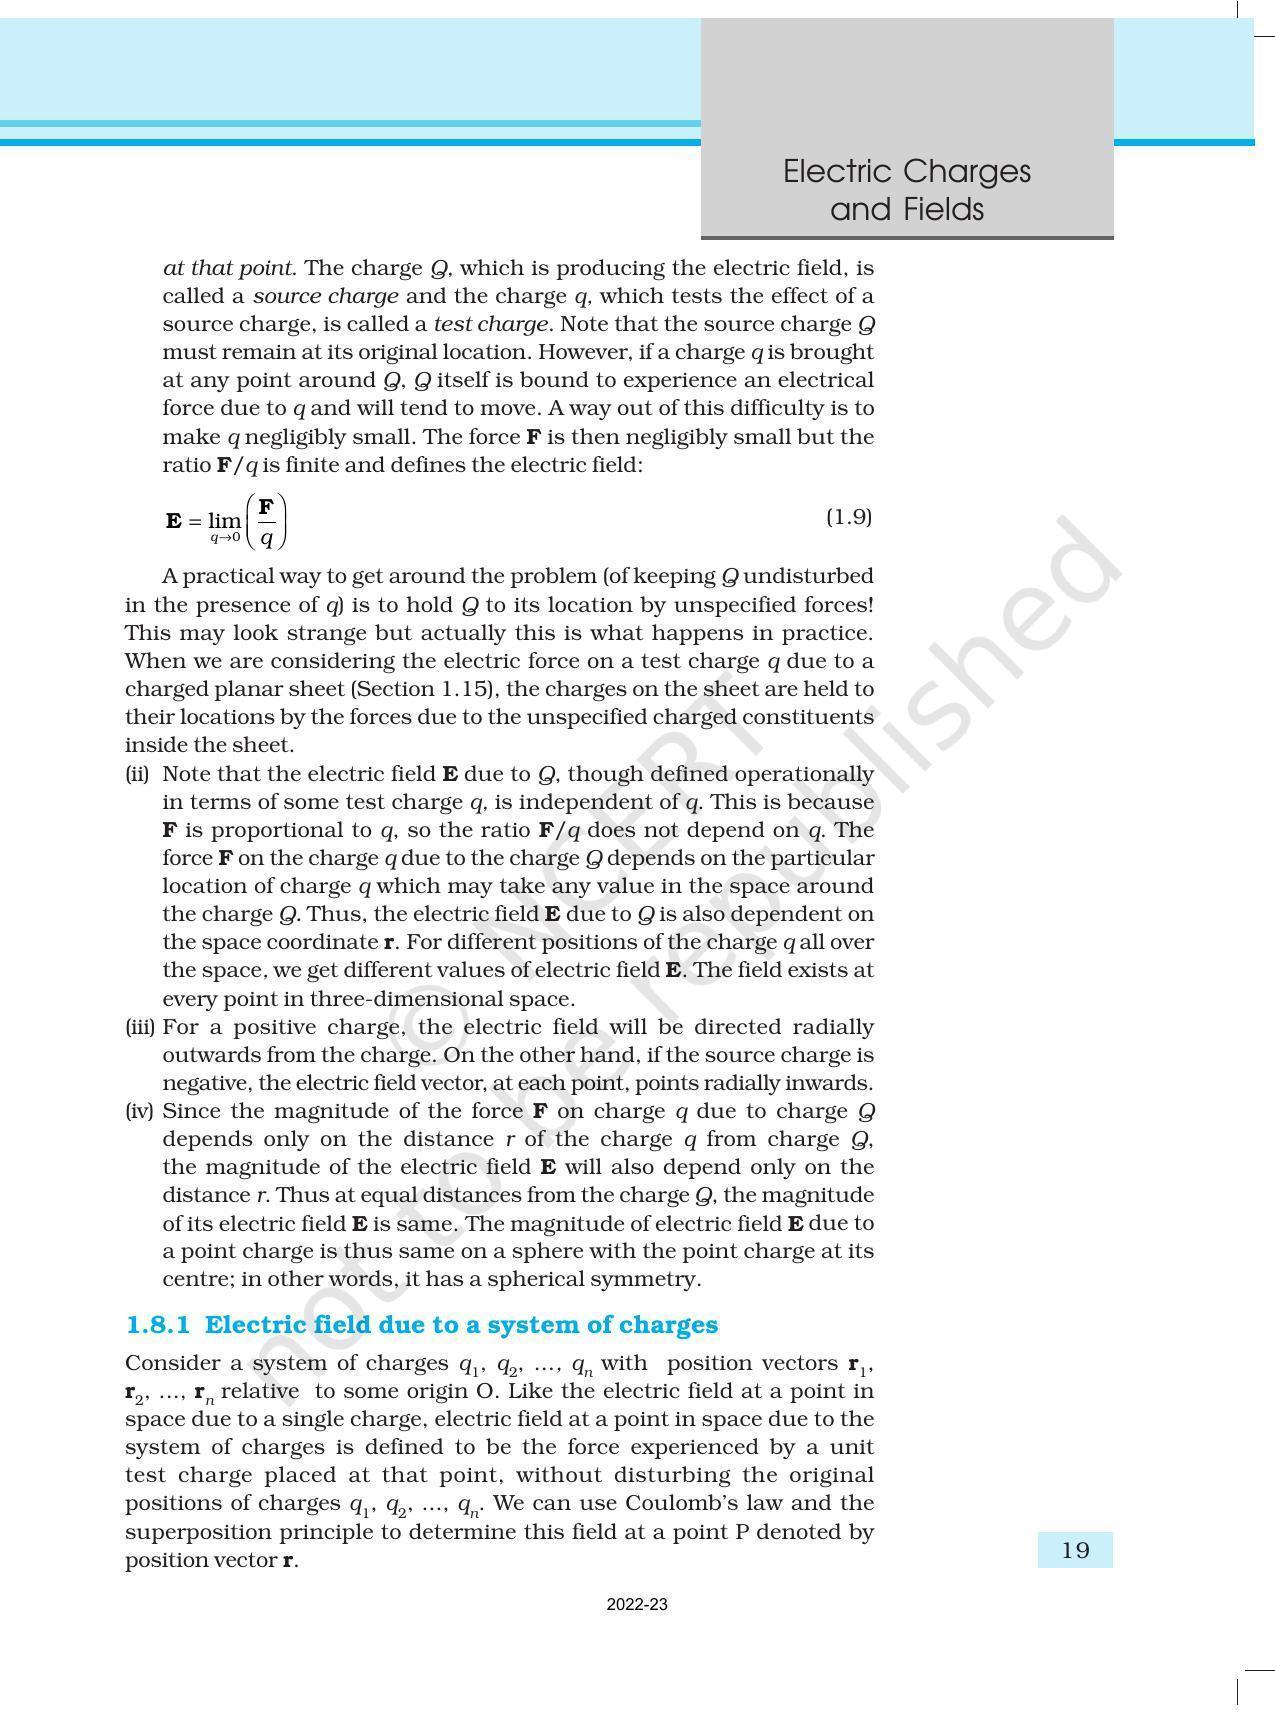 NCERT Book for Class 12 Physics Chapter 1 Electric Charges and Fields - Page 19